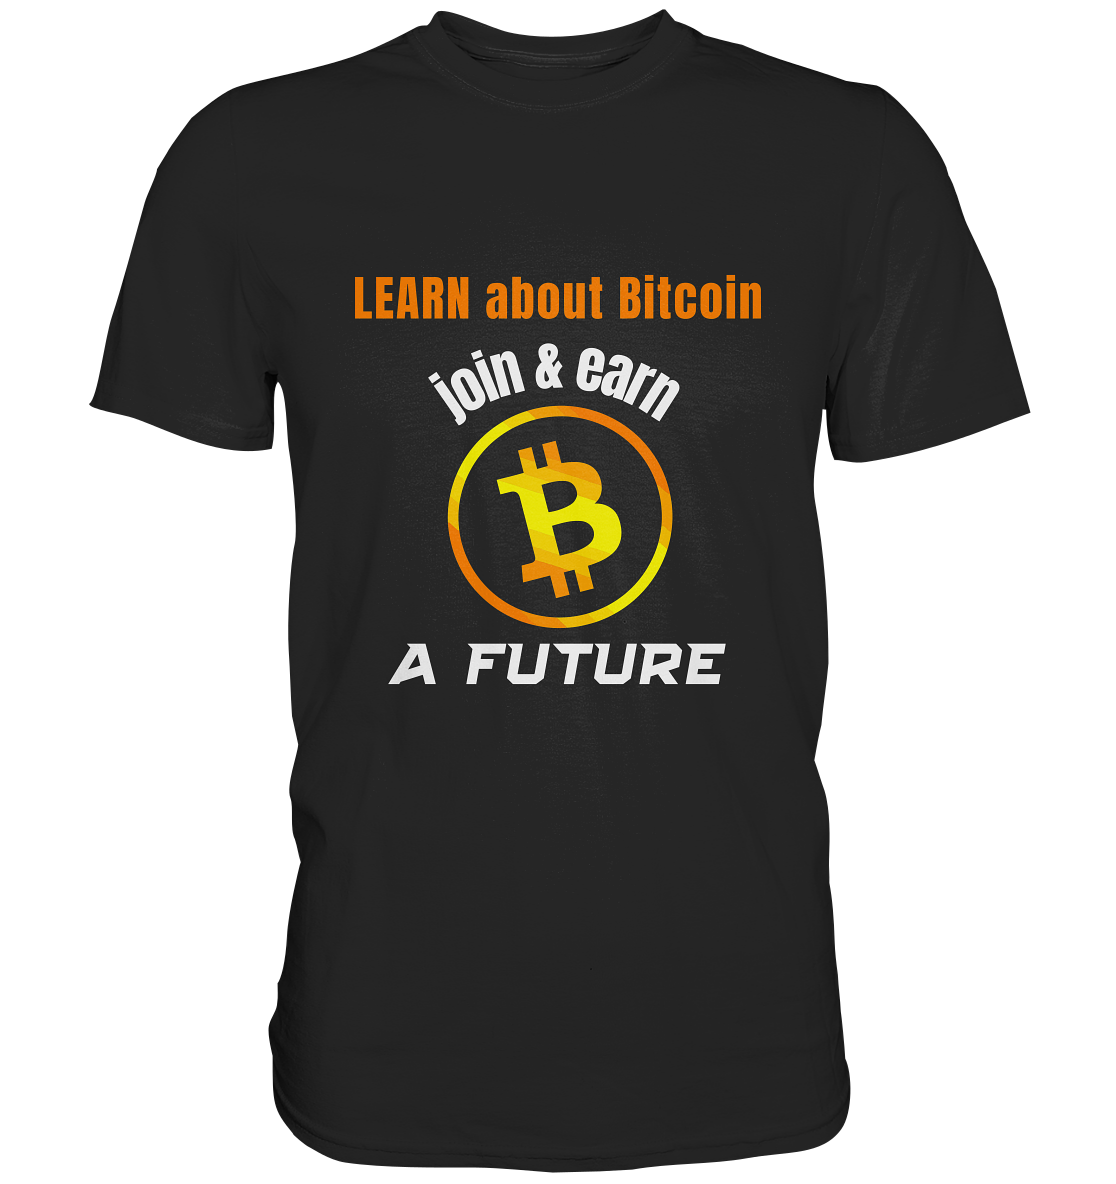 LEARN ABOUT BITCOIN - join & earn - A FUTURE - Classic Shirt